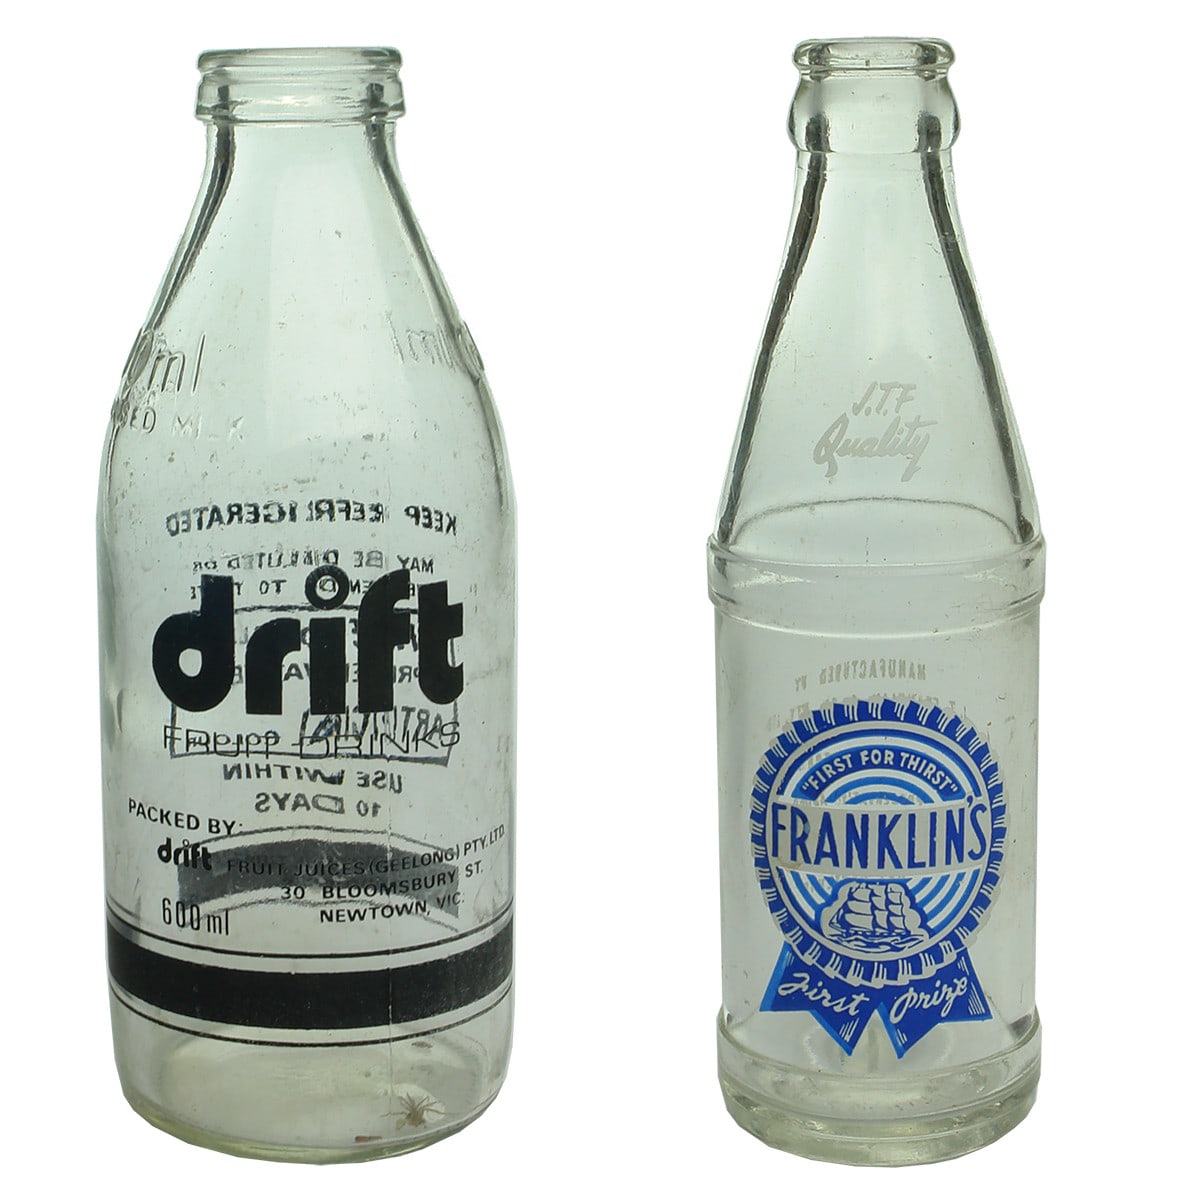 Two Geelong Ceramic Label Bottles: Drift Fruit Juices 600 ml and Franklin's crown seal 6.5 oz. (Victoria)